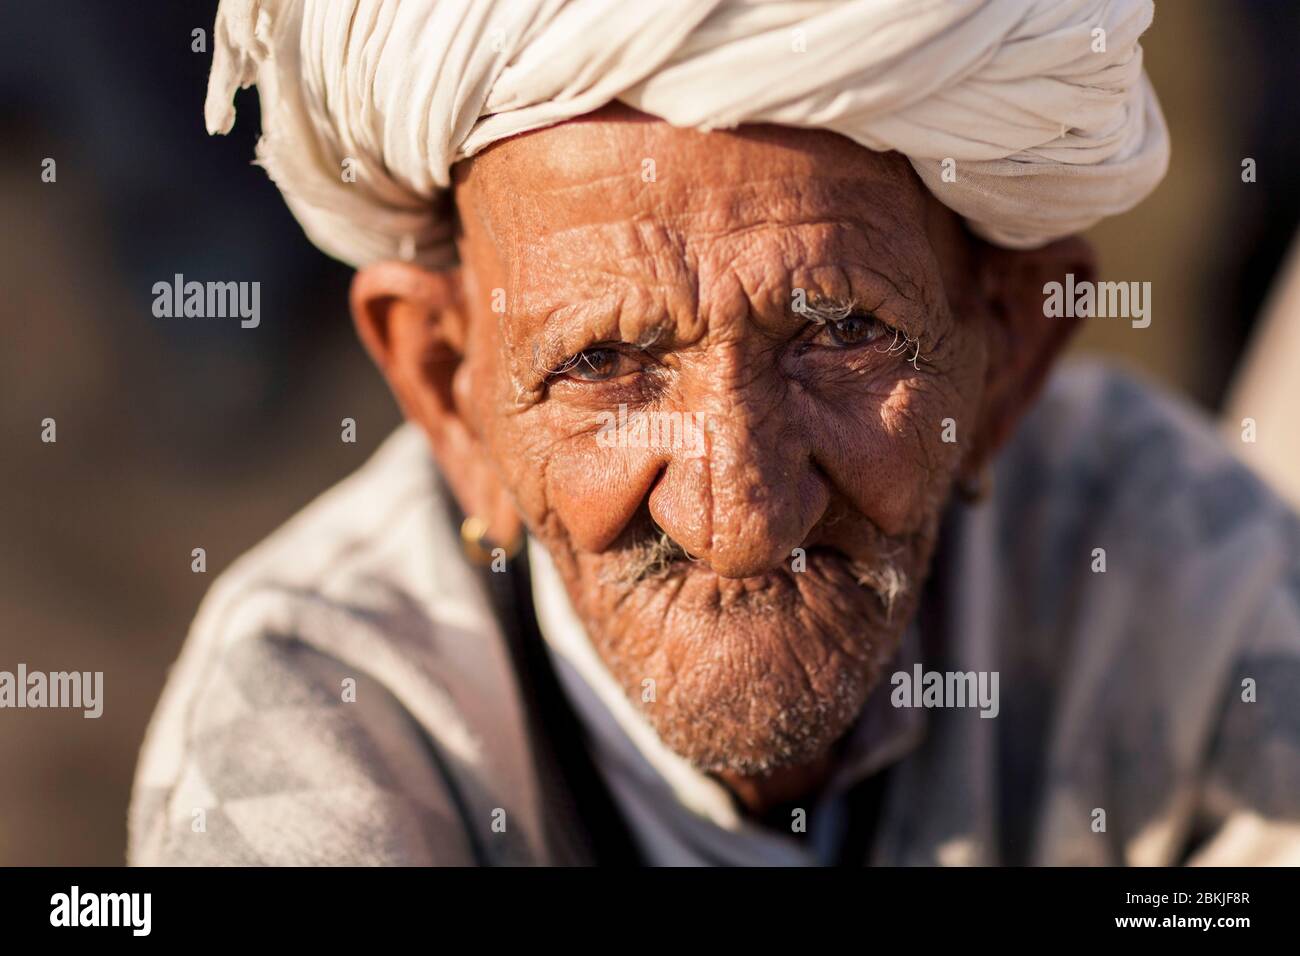 India, Rajasthan, Bikaner, Camel Festival, portrait of an old man with a piercing gaze Stock Photo